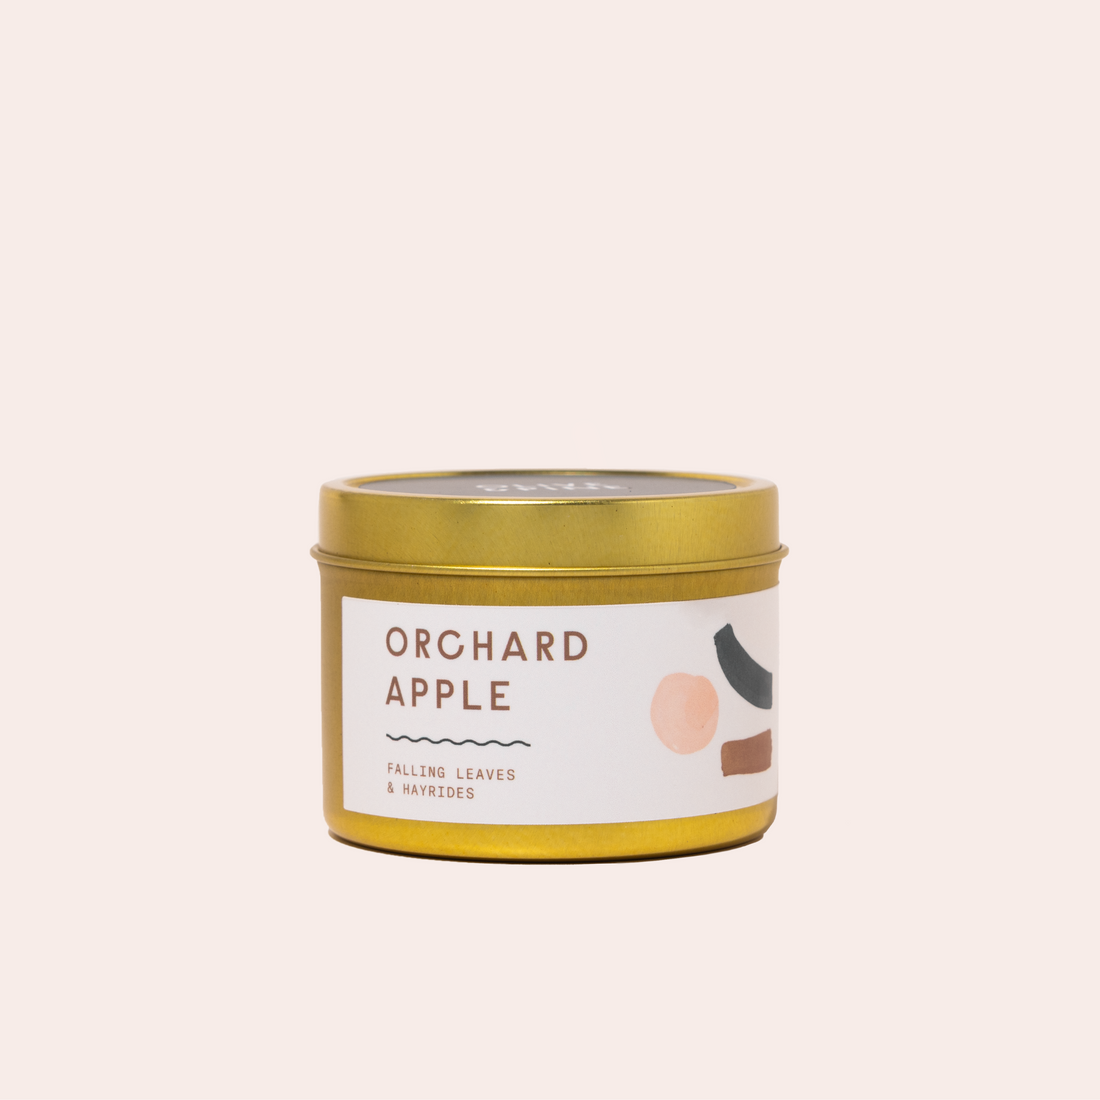 Orchard Apple Travel Candle